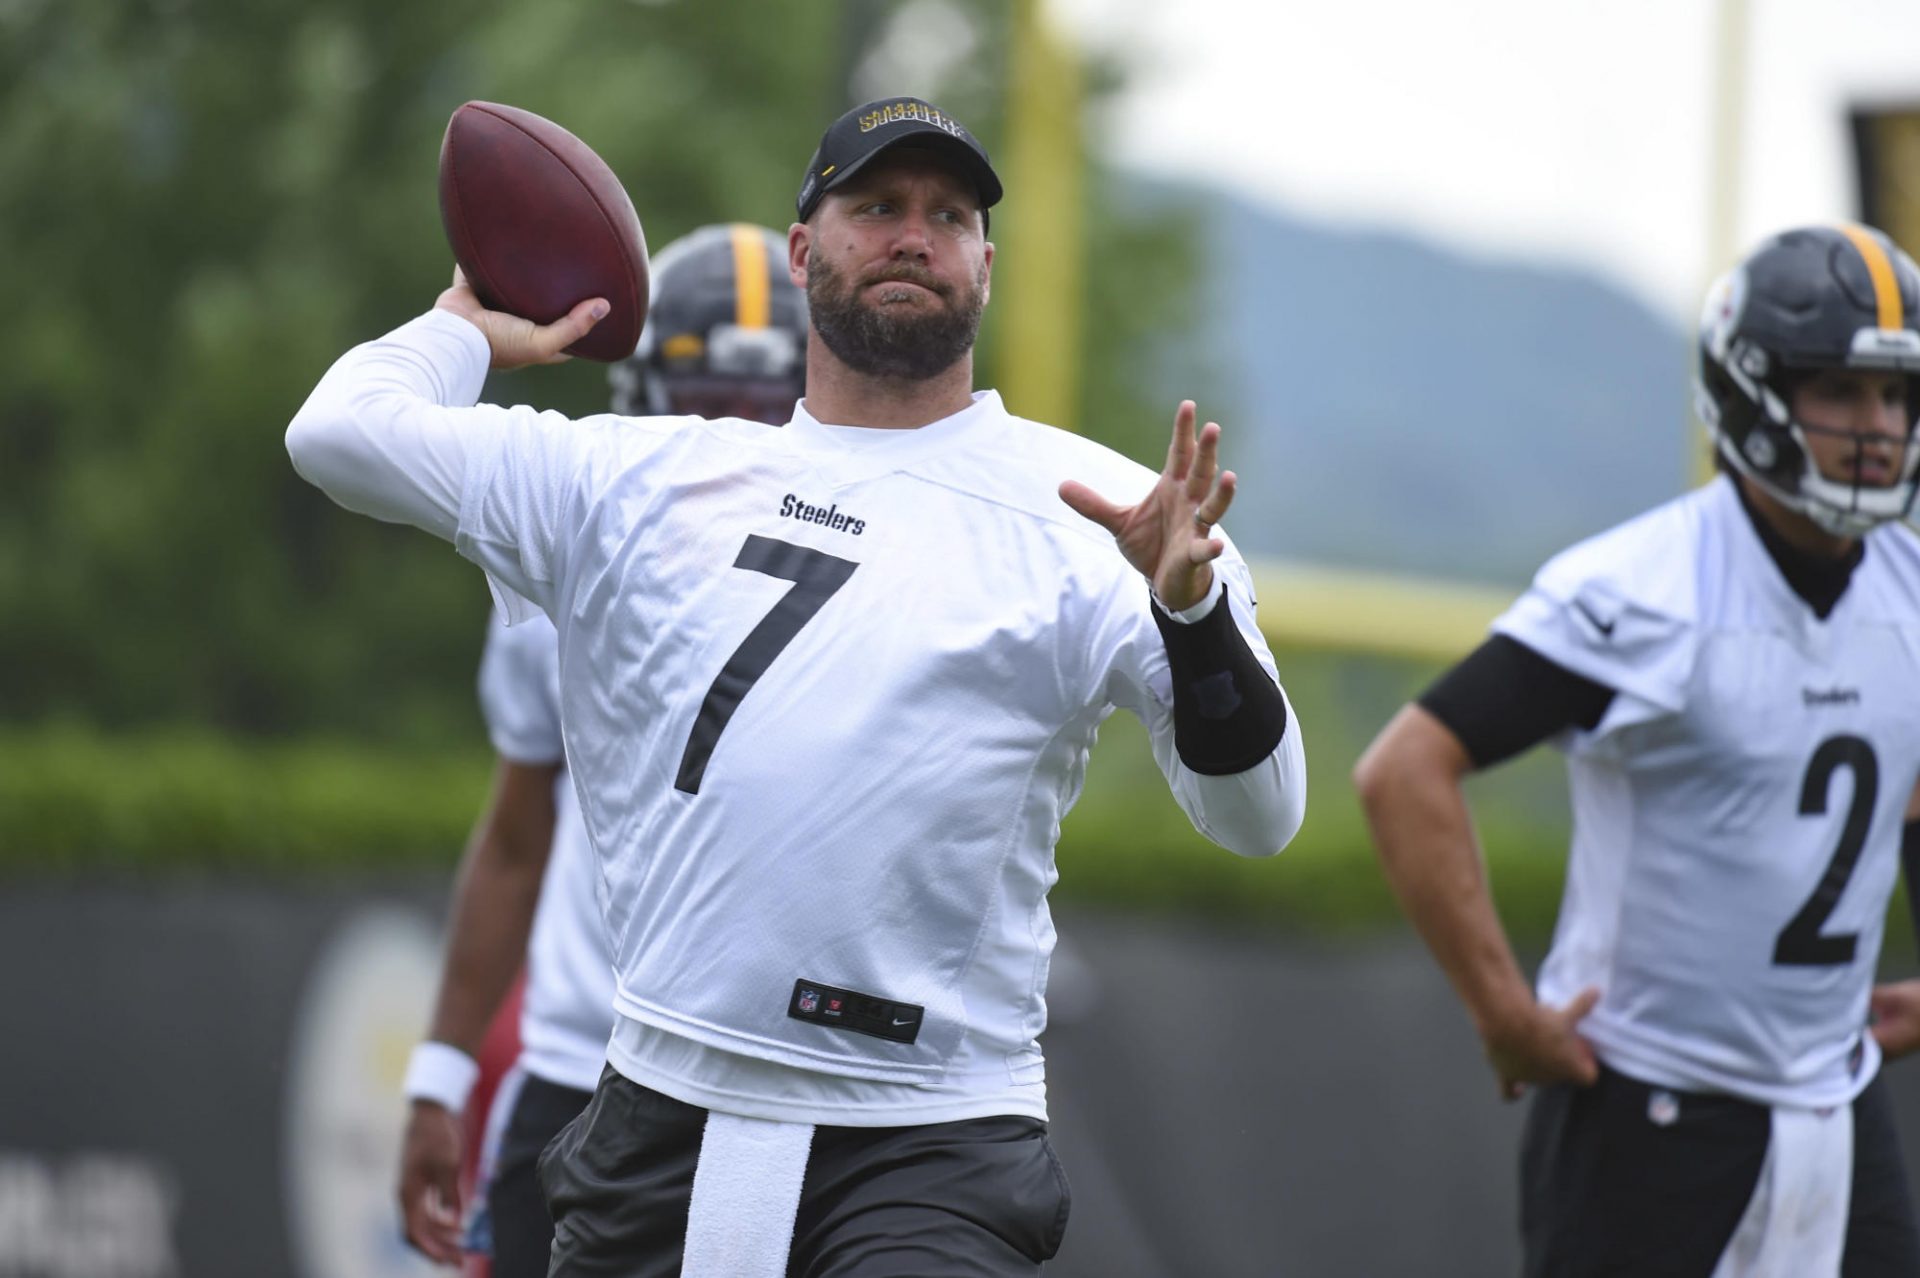 ESPN analyst expects Steelers QB Ben Roethlisberger to be benched this season